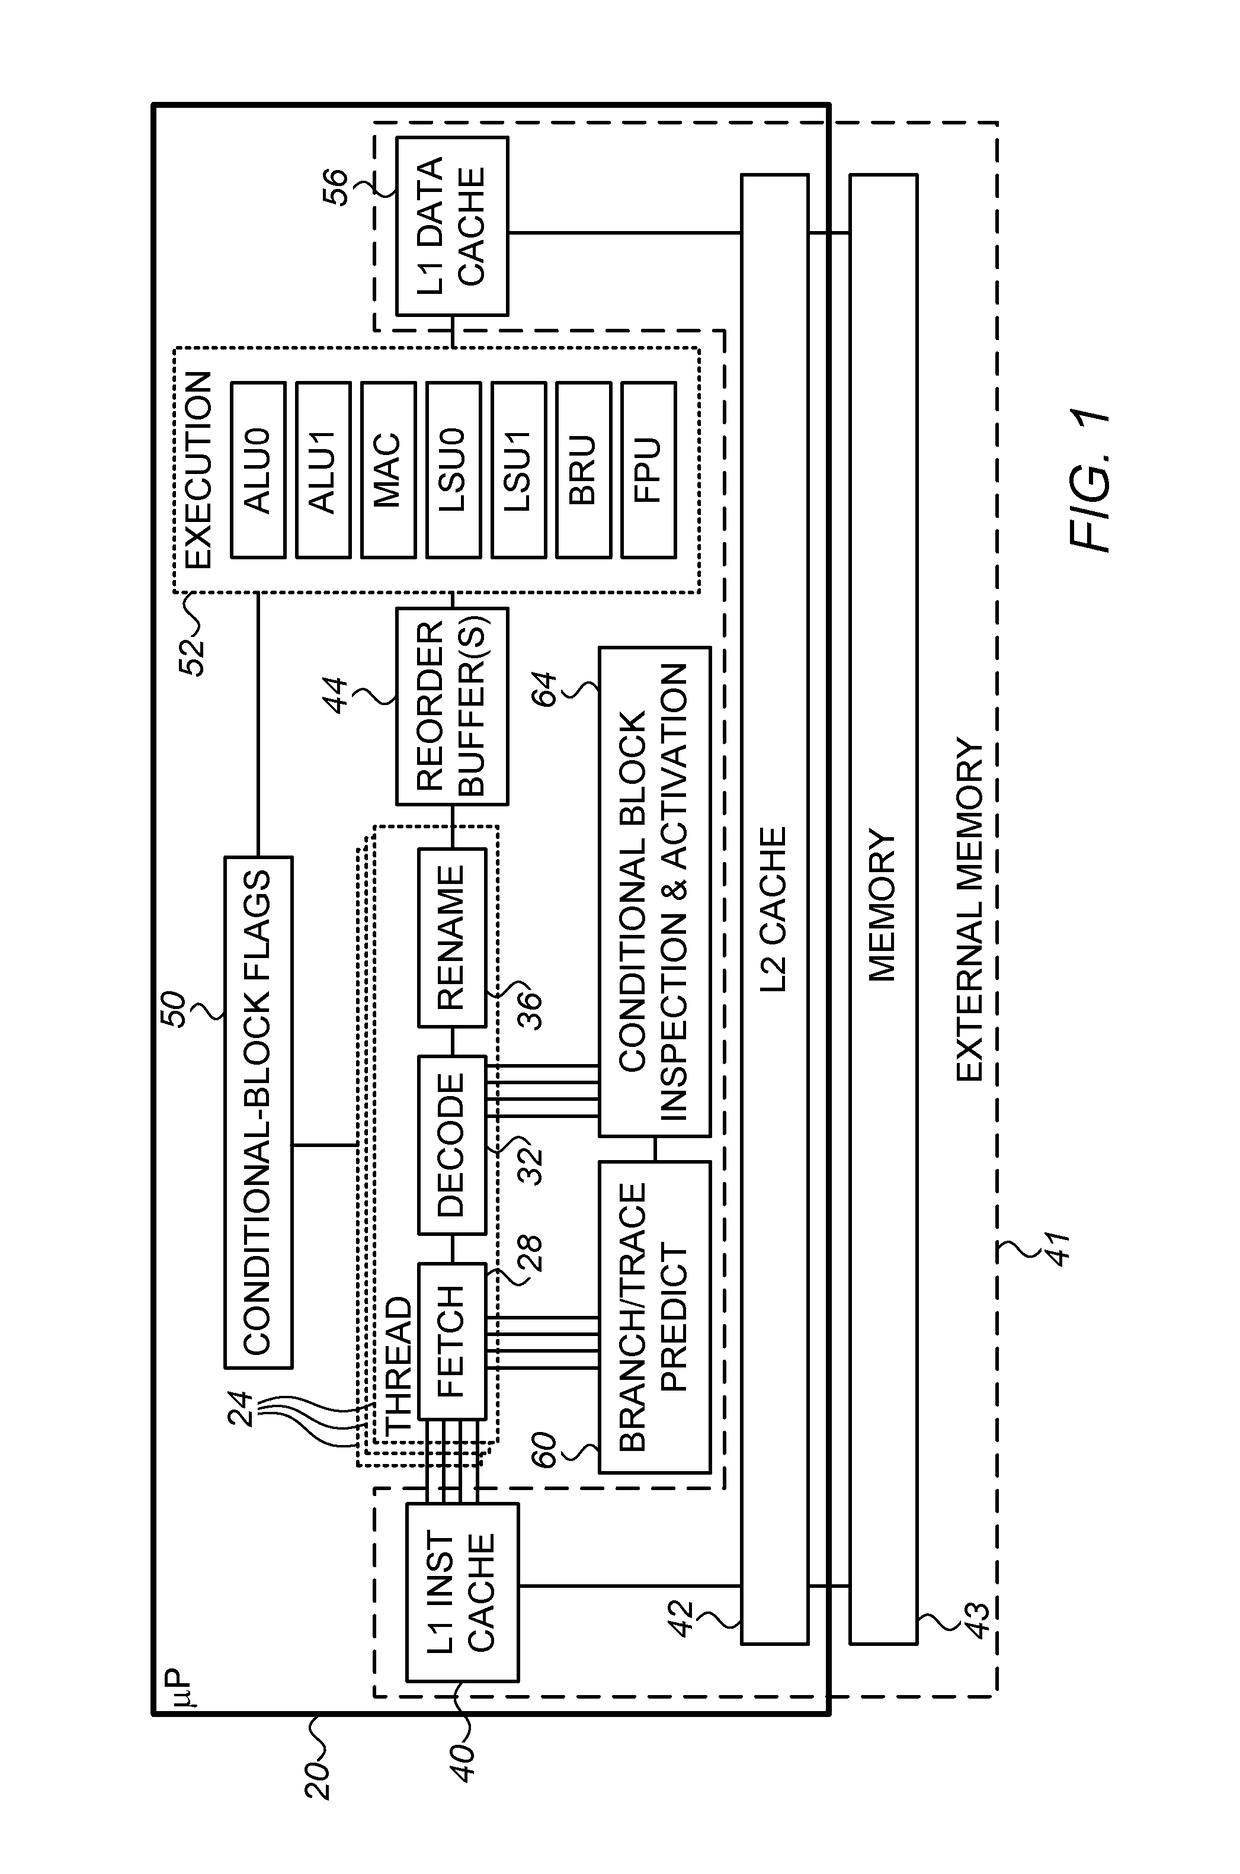 Hardware-based run-time mitigation of blocks having multiple conditional branches